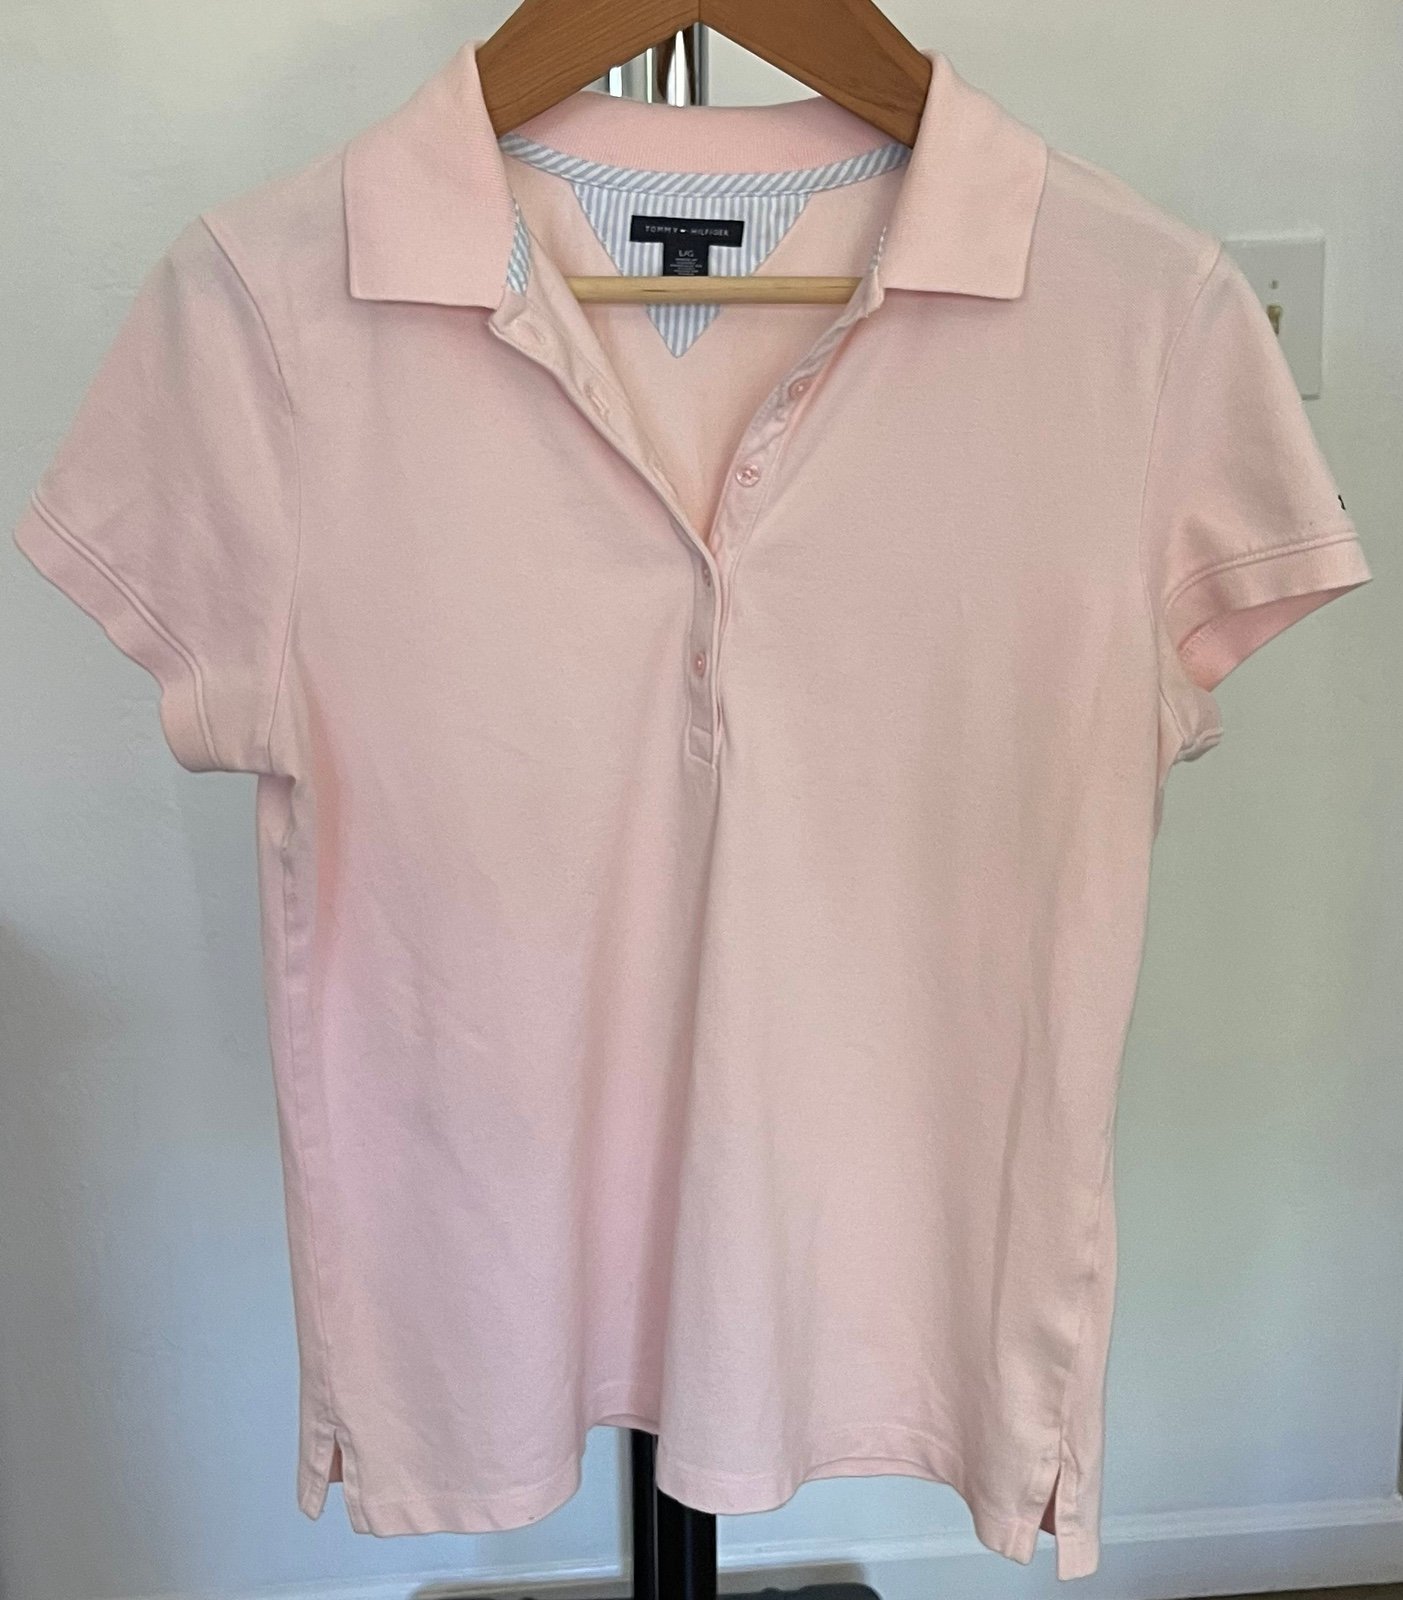 Classic Tommy Hilfiger Women’s Pink Polo Short Sleeve T